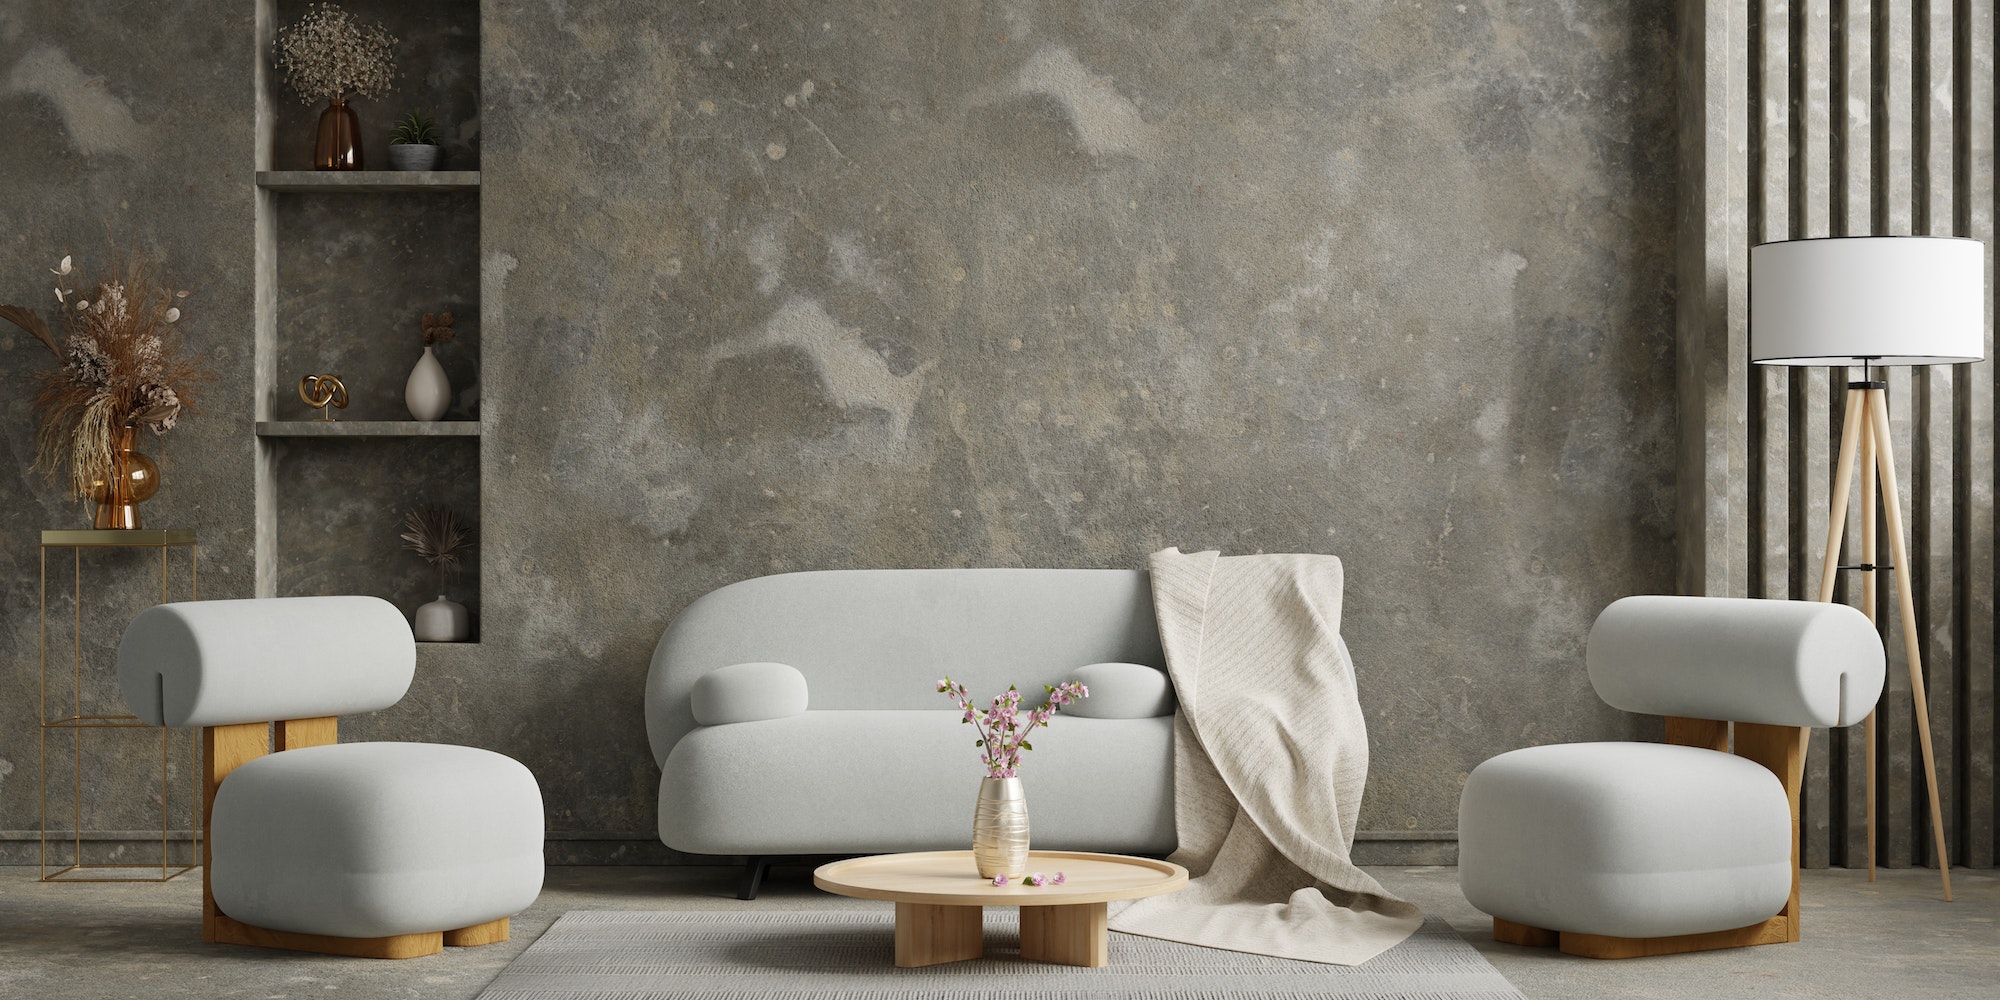 industrial-style-interior-with-gray-sofa-and-gray-armchair-on-dark-cement-wall.jpg